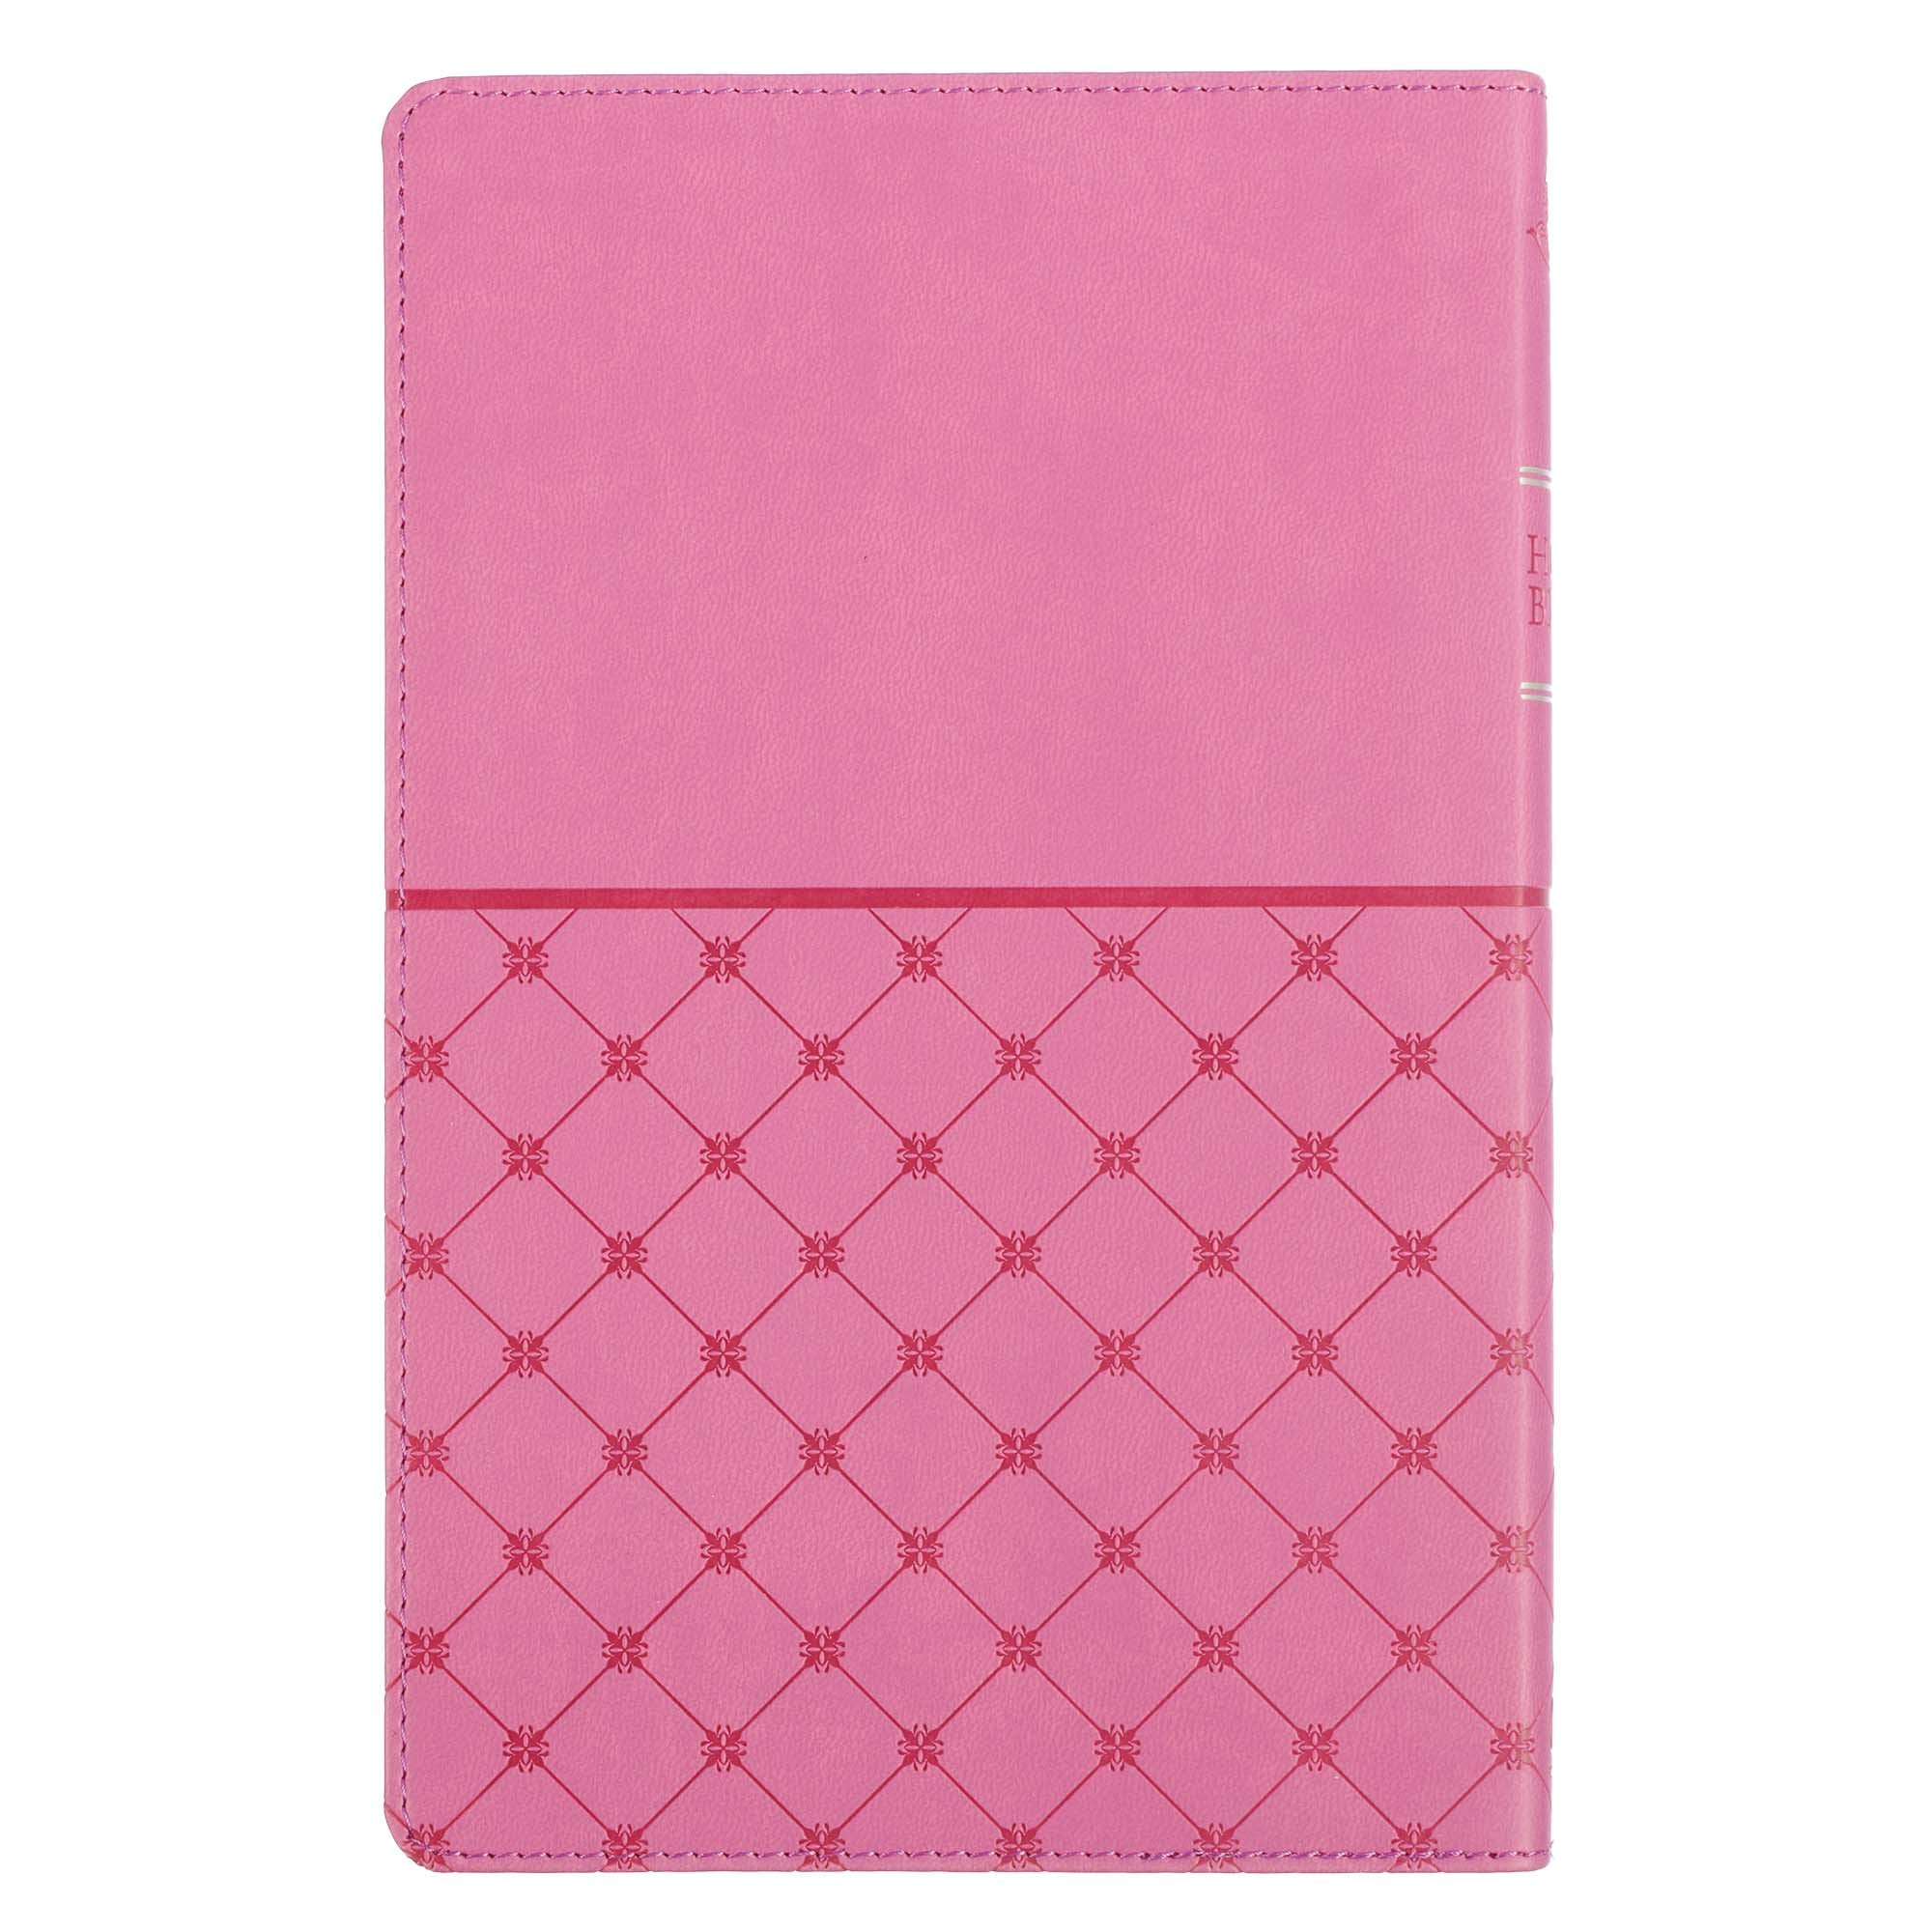 KJV Holy Bible, Gift Edition Faux Leather, King James Version, Pink